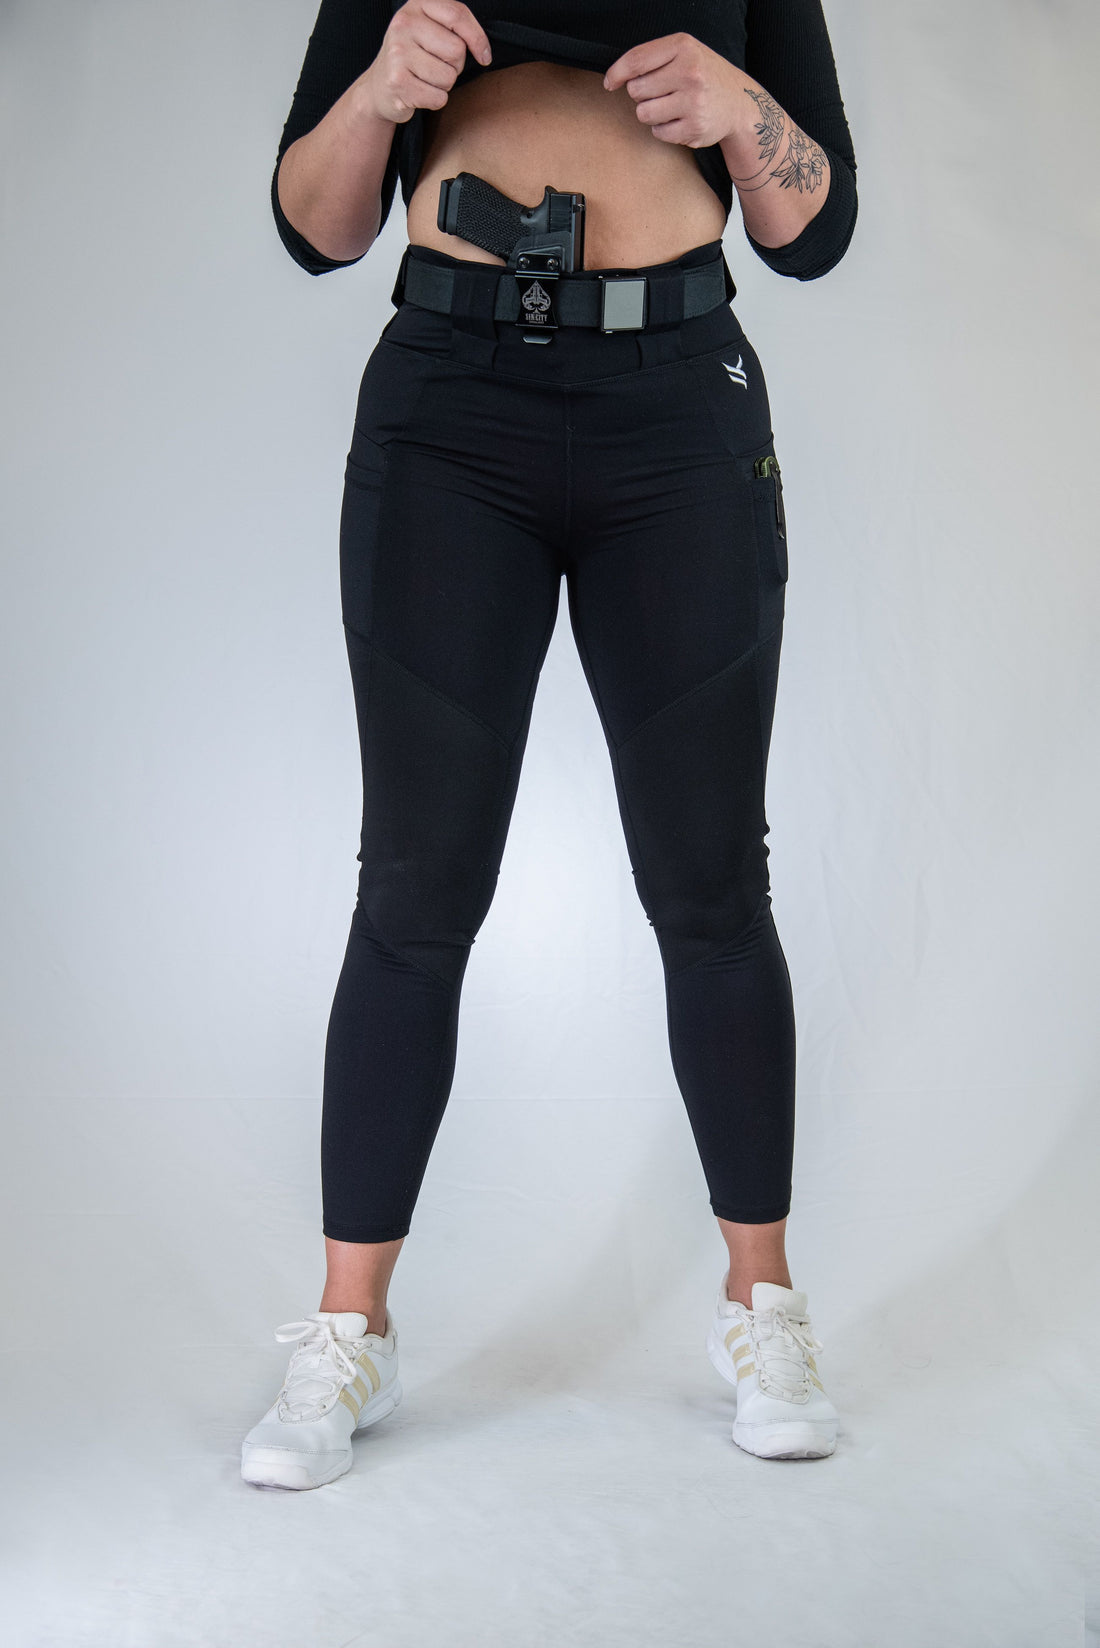 Abby Tight: High-Performance Tactical Leggings